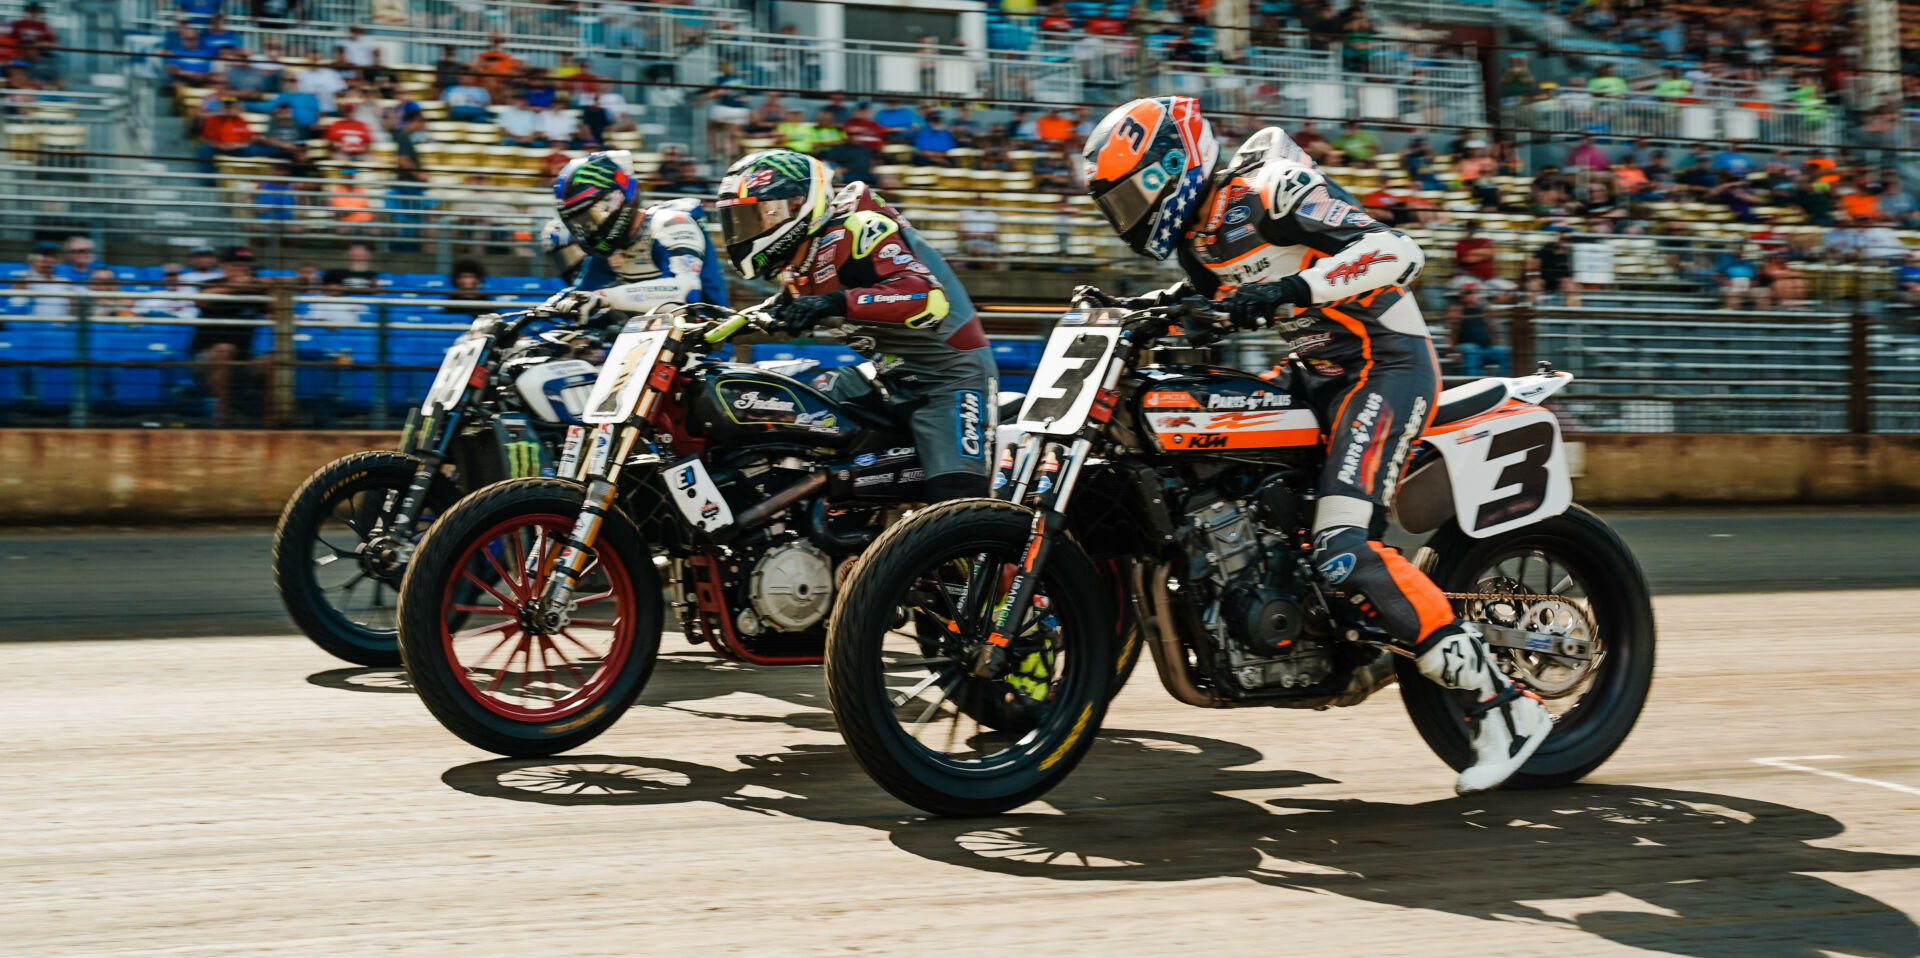 Briar Bauman (3), Jared Mees (1), Dallas Daniels (32), and JD Beach (behind Daniels) launch off the line at the 2023 Springfield Mile II. Photo by Kristin Lassen, courtesy AFT.